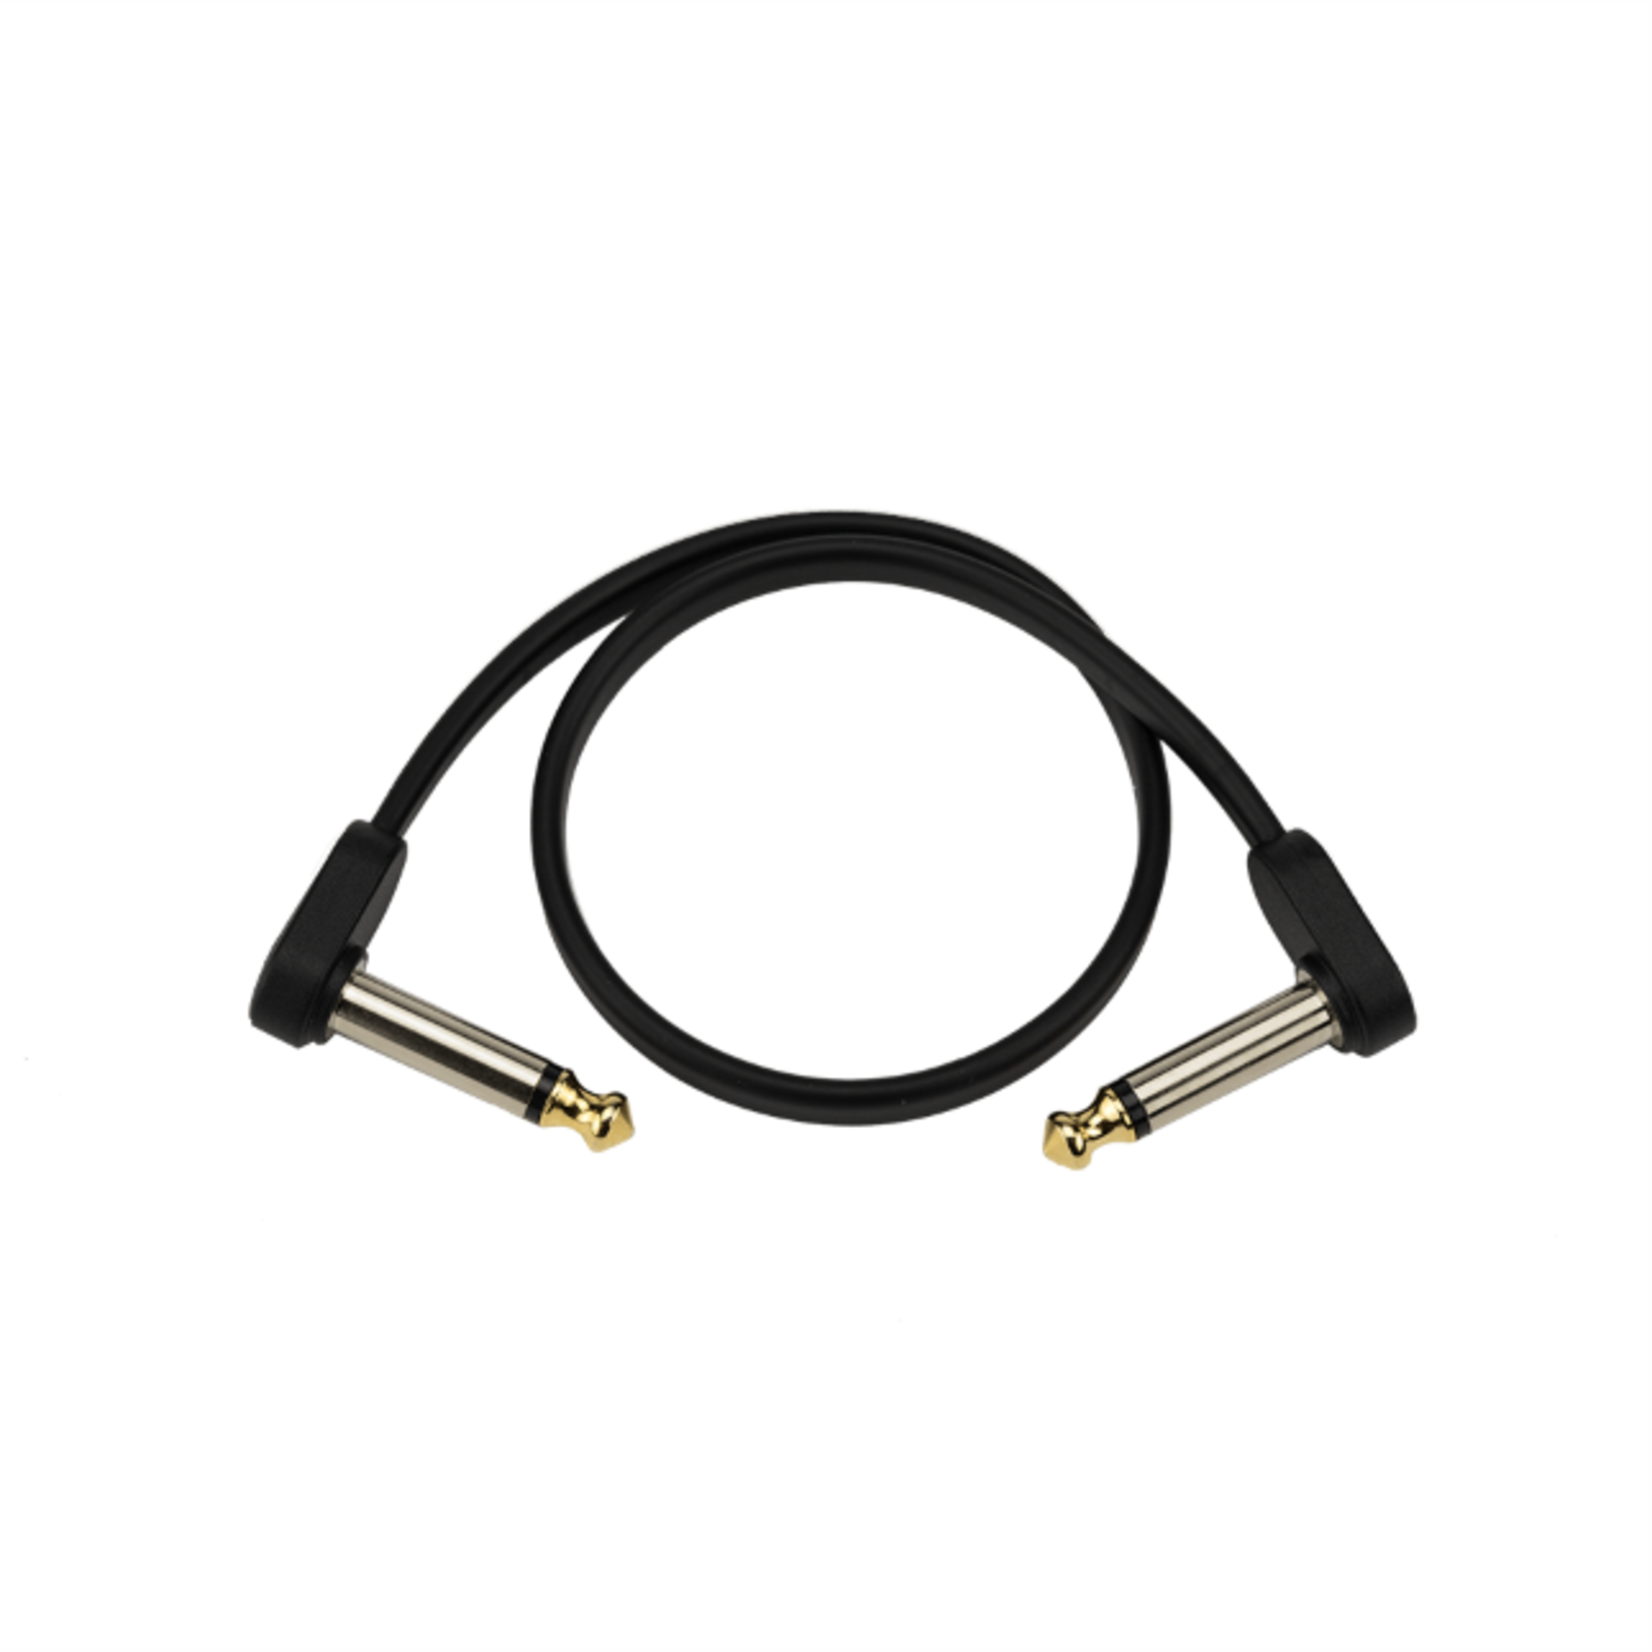 D'Addario D'Addario Flat Patch Cable 4 inch Right Angle Two Pack